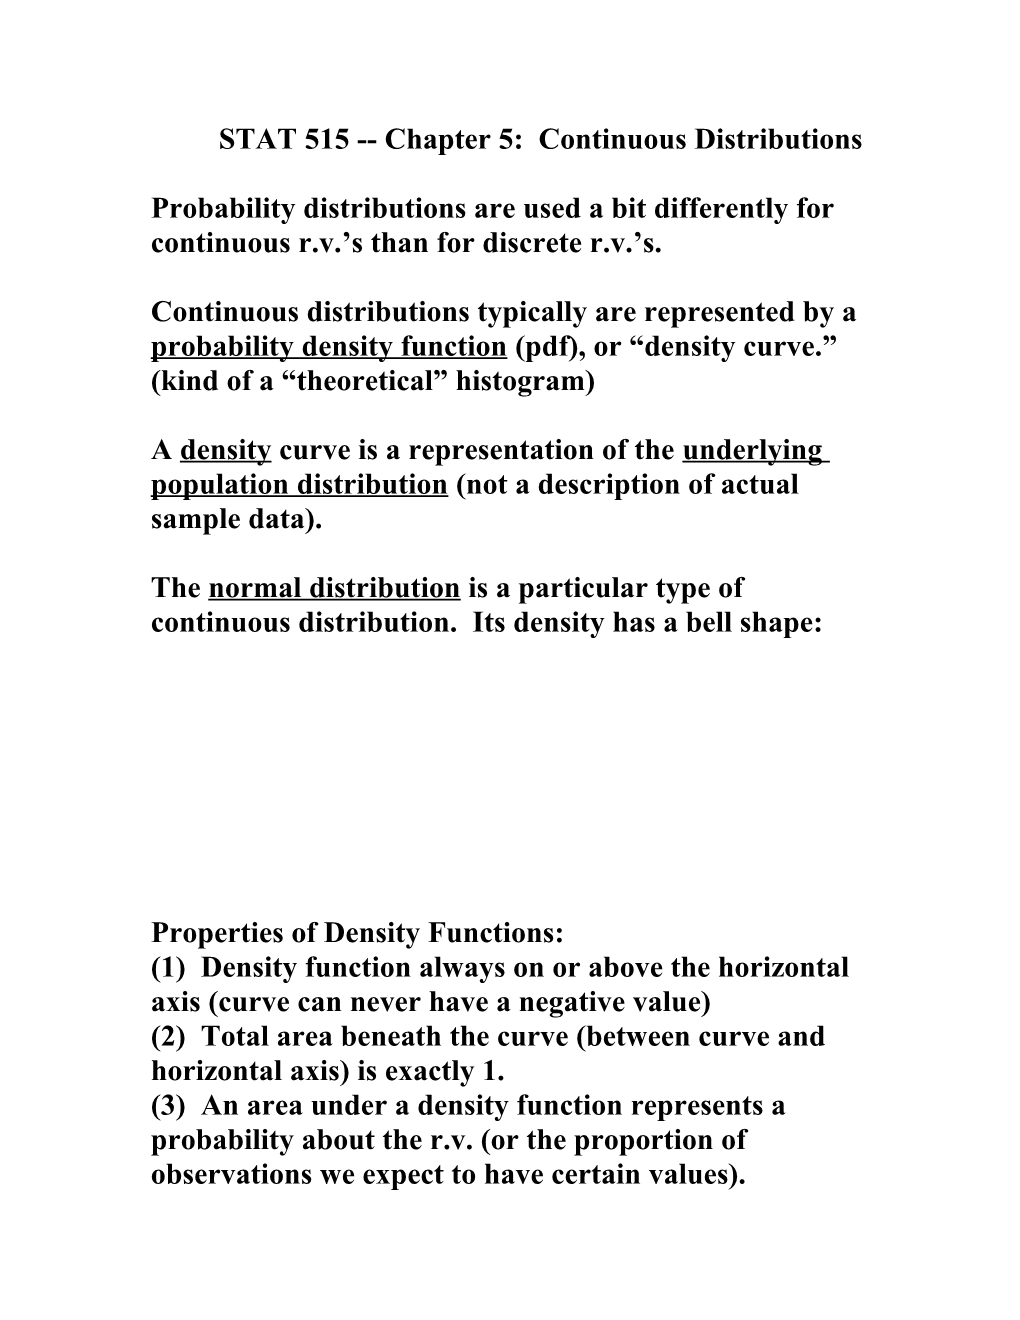 STAT 515 Chapter 6: Continuous Distributions